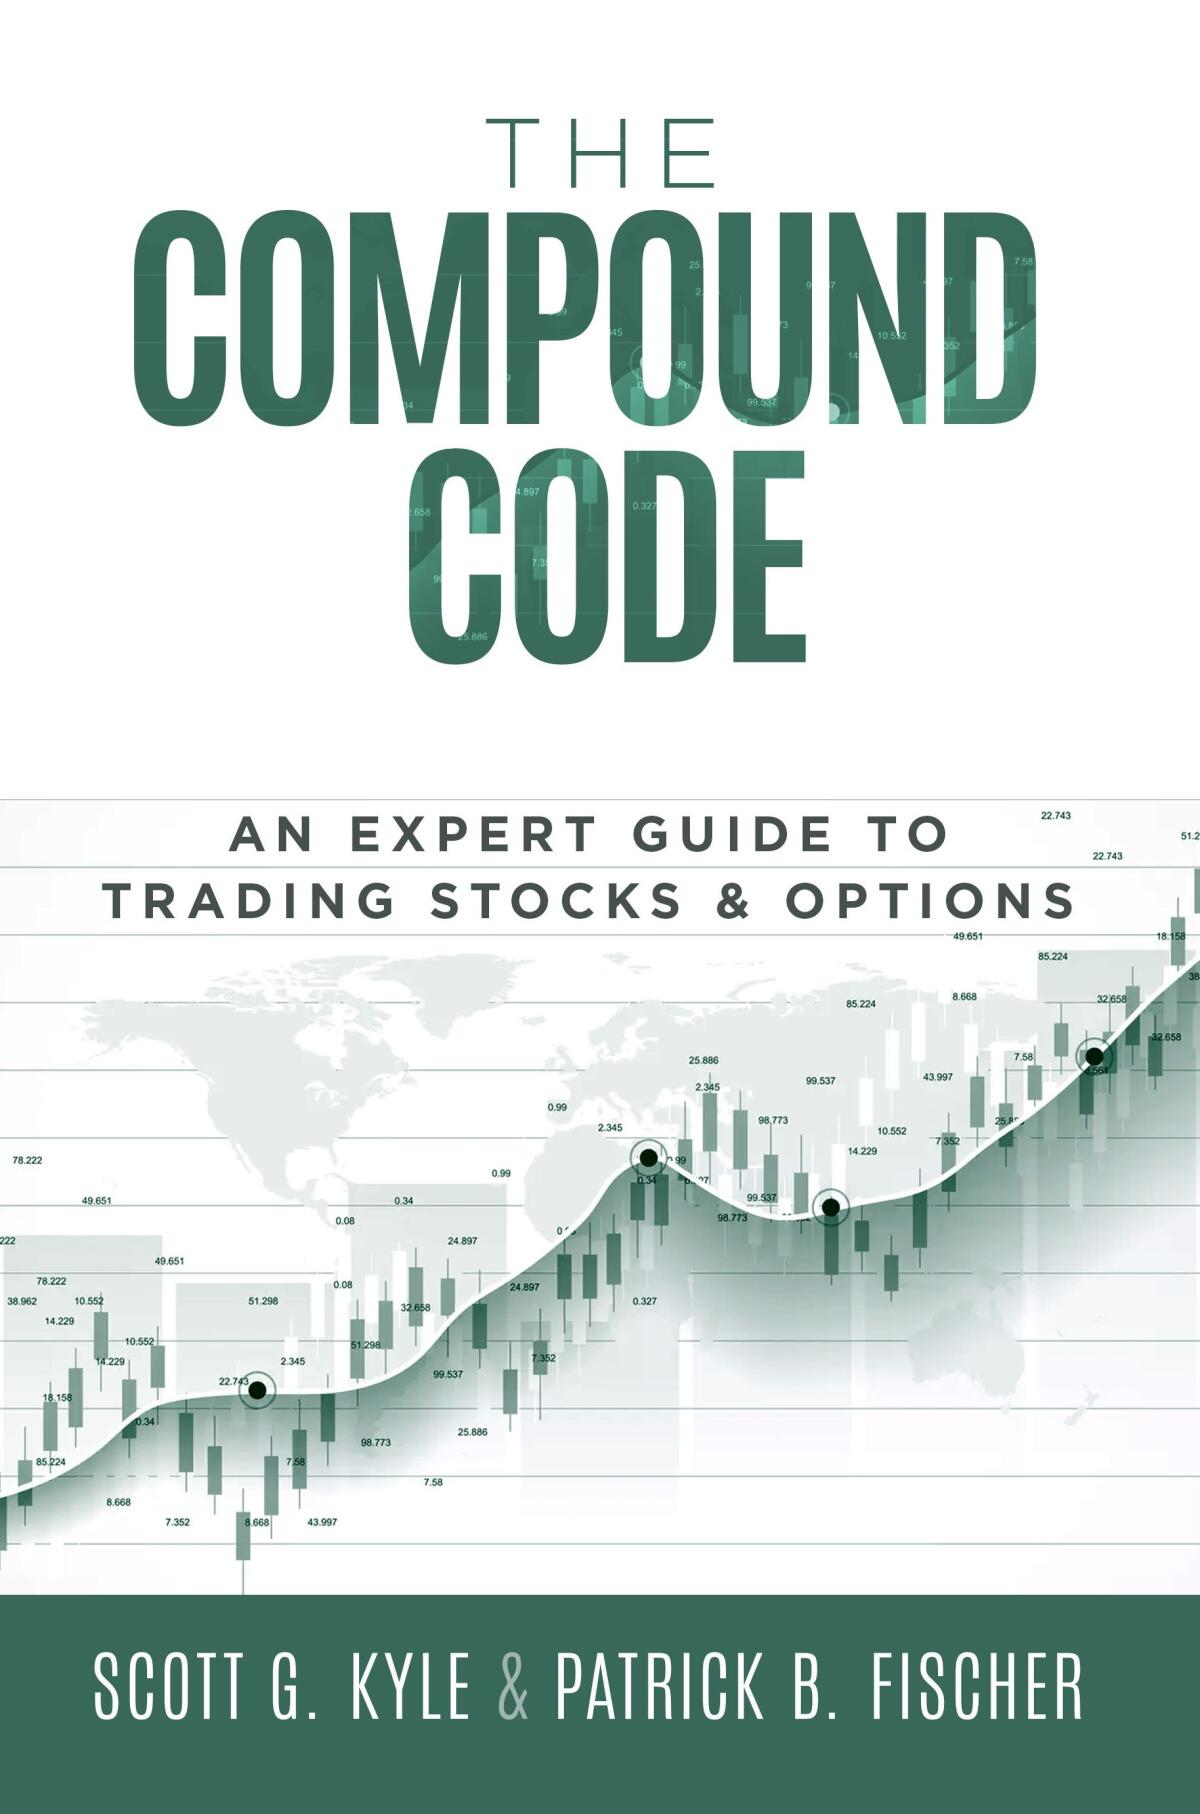 "The Compound Code" was written by two members of La Jolla-based Coastwise Capital Group.